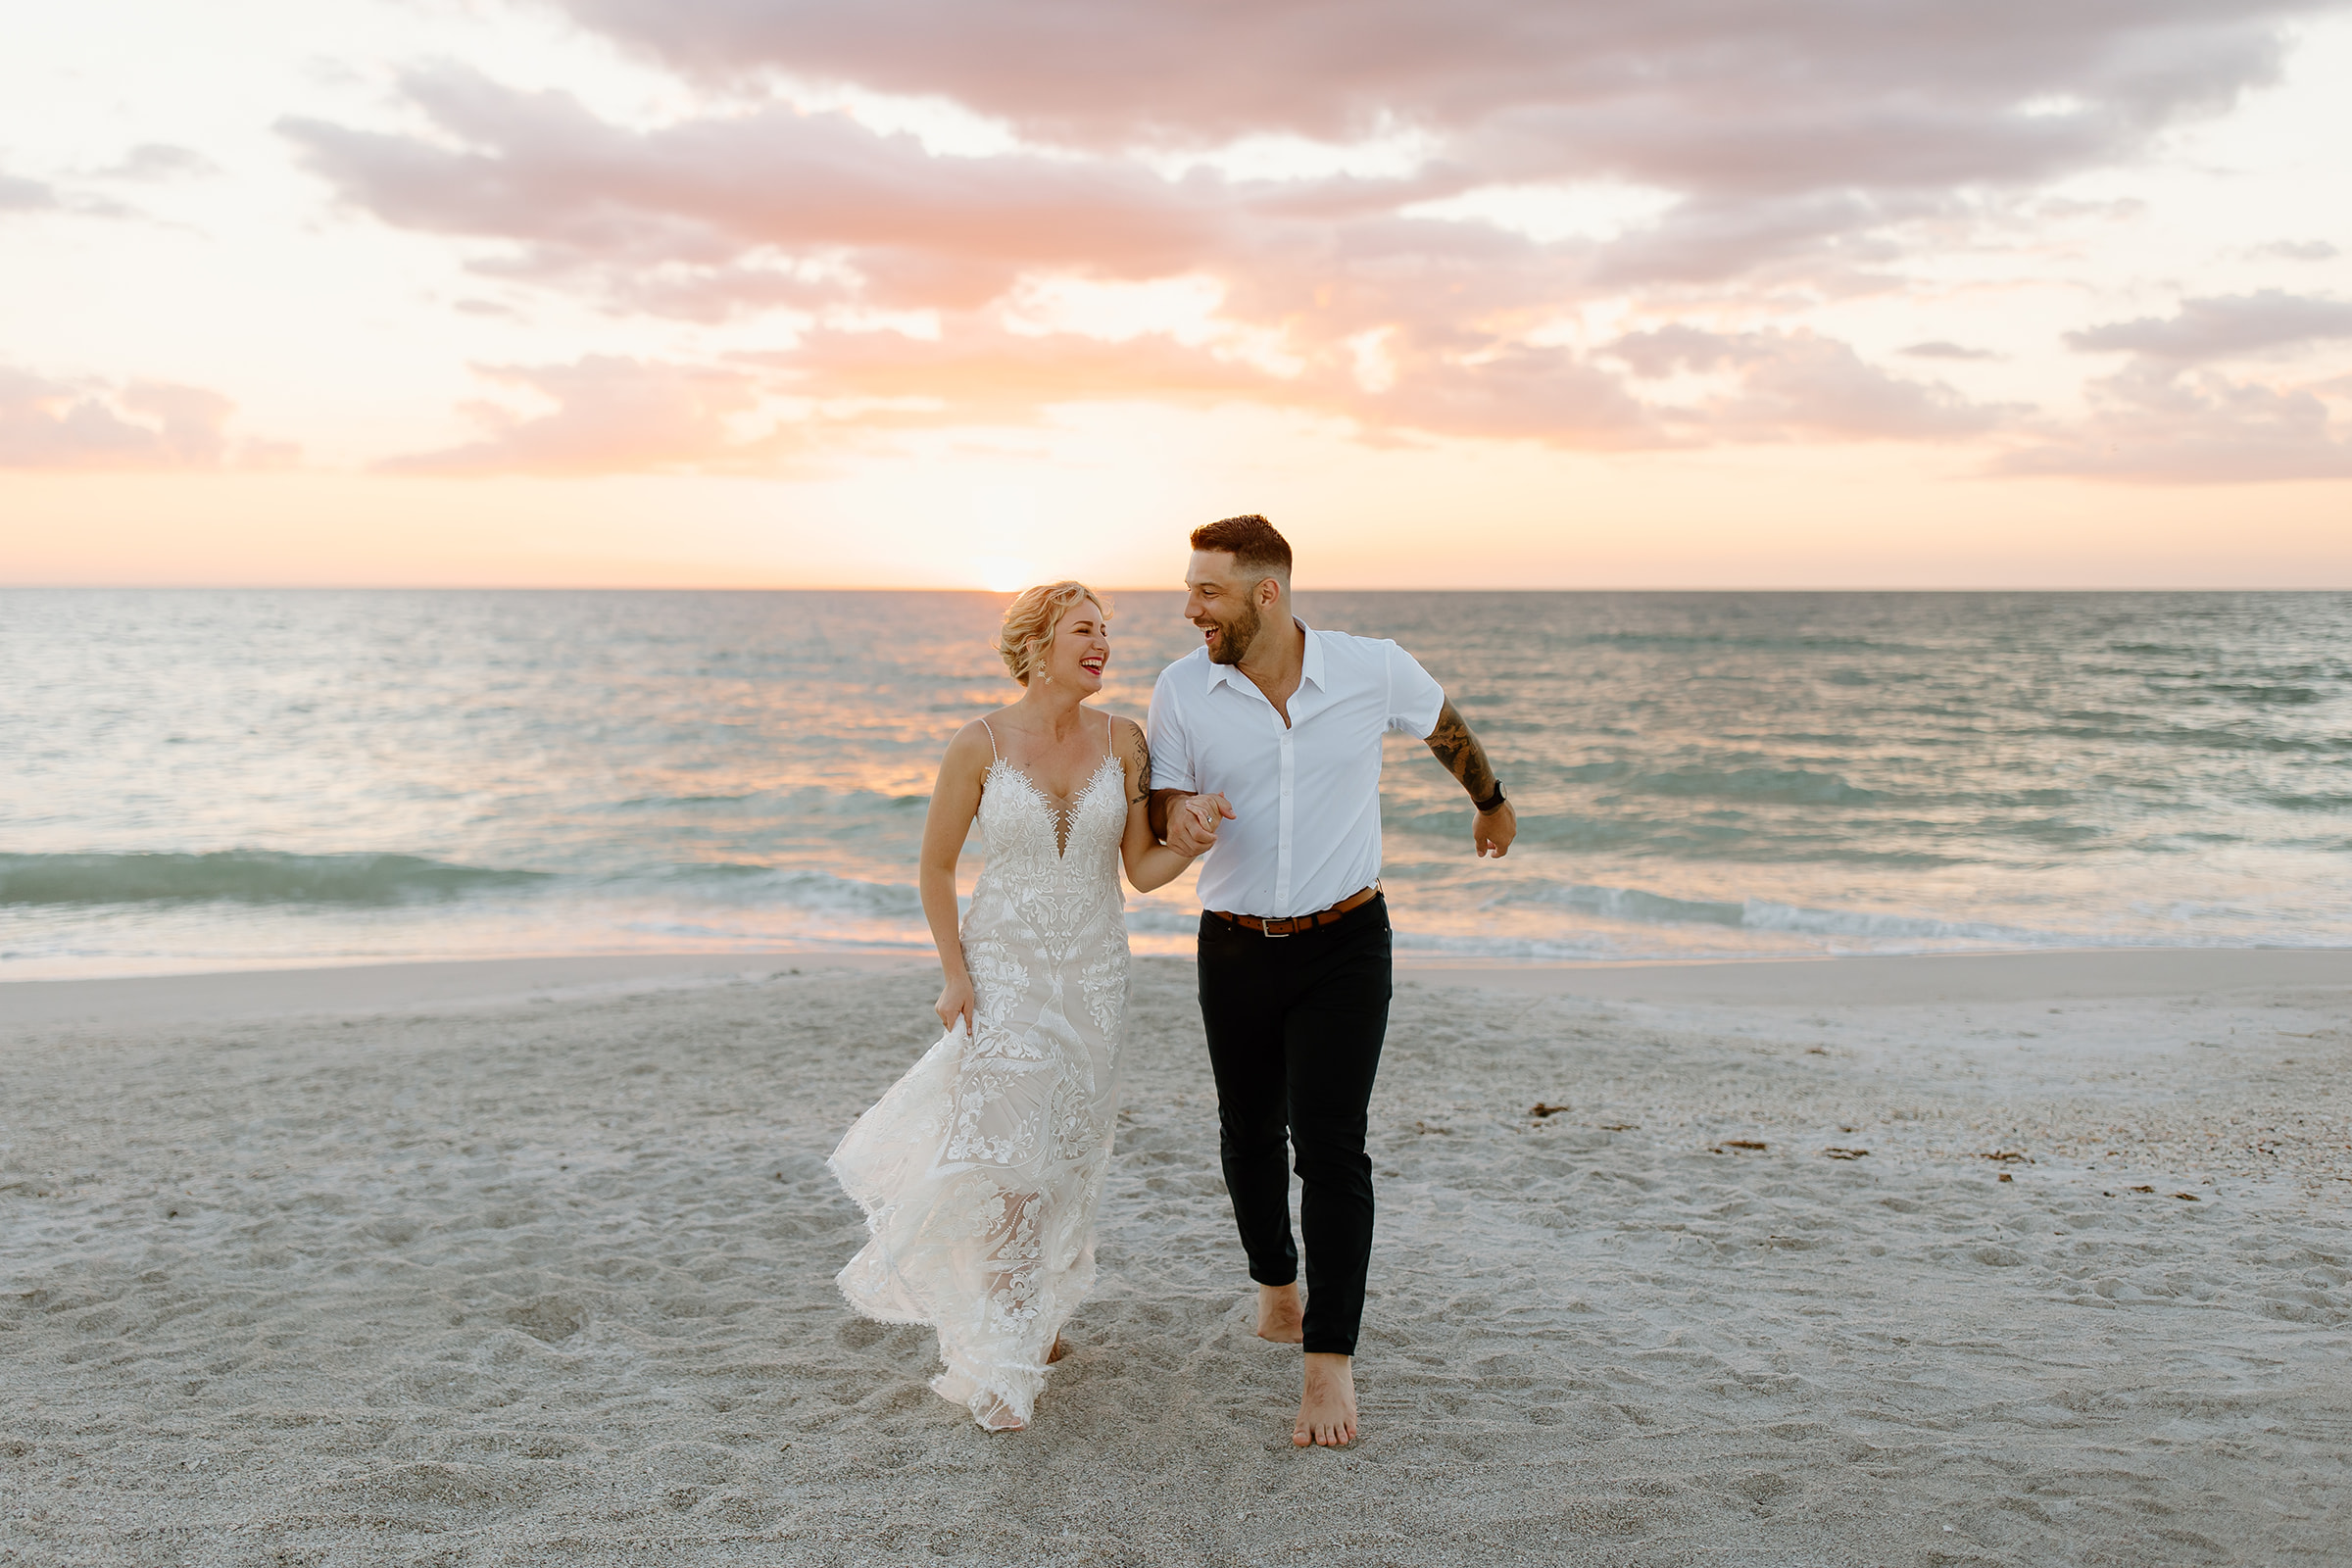 Bride and groom running towards the camera on the beach with a sunset in the background